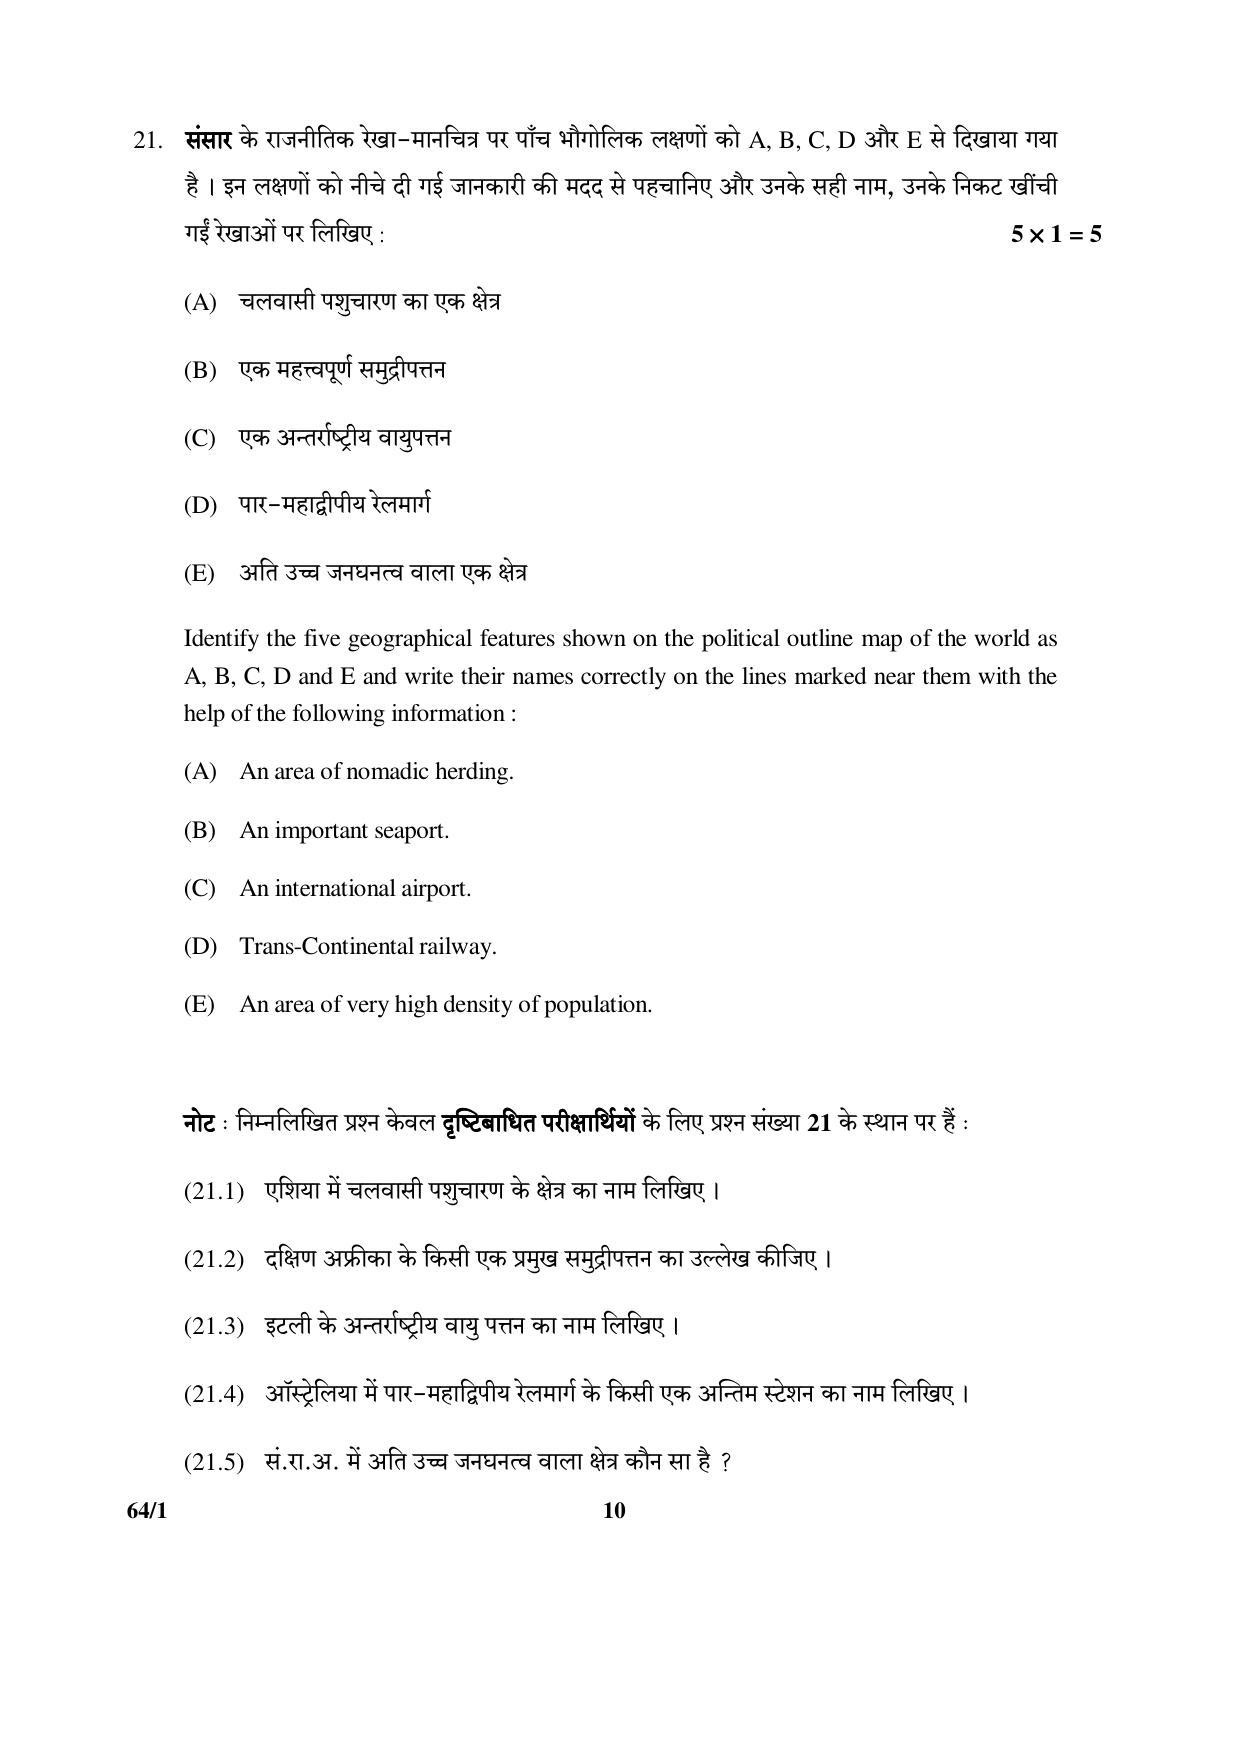 CBSE Class 12 64-1 (Geography) 2017-comptt Question Paper - Page 10